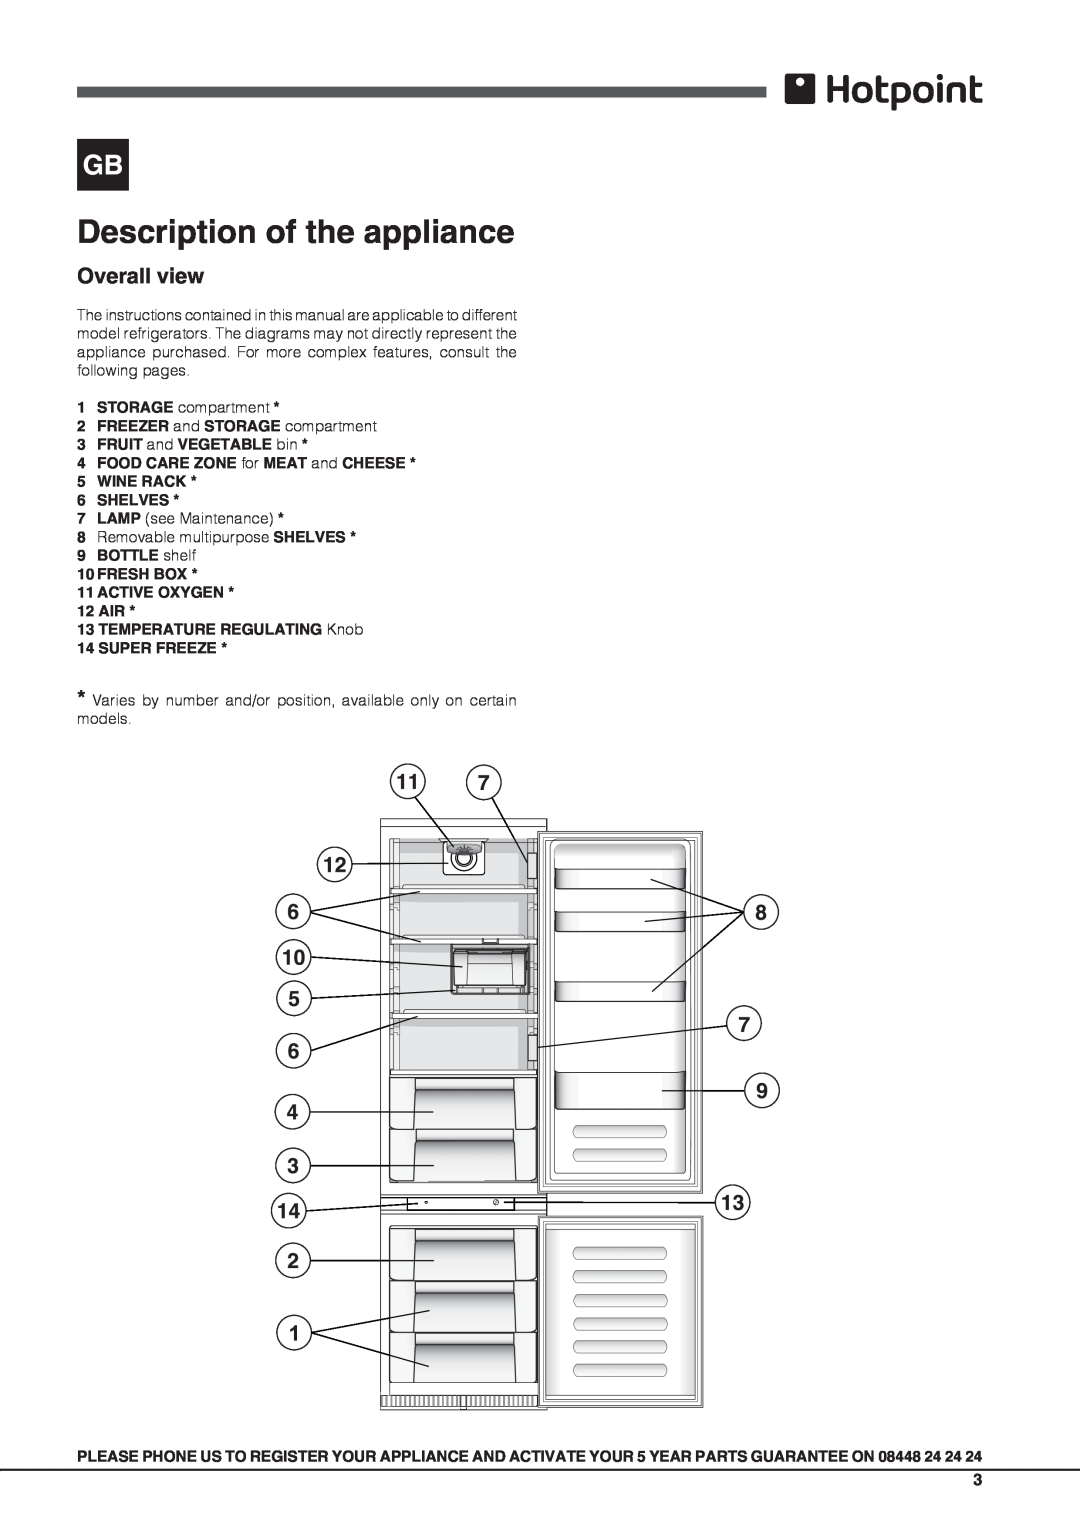 Hotpoint HM 3x AA AI manual Description of the appliance, Overall view 